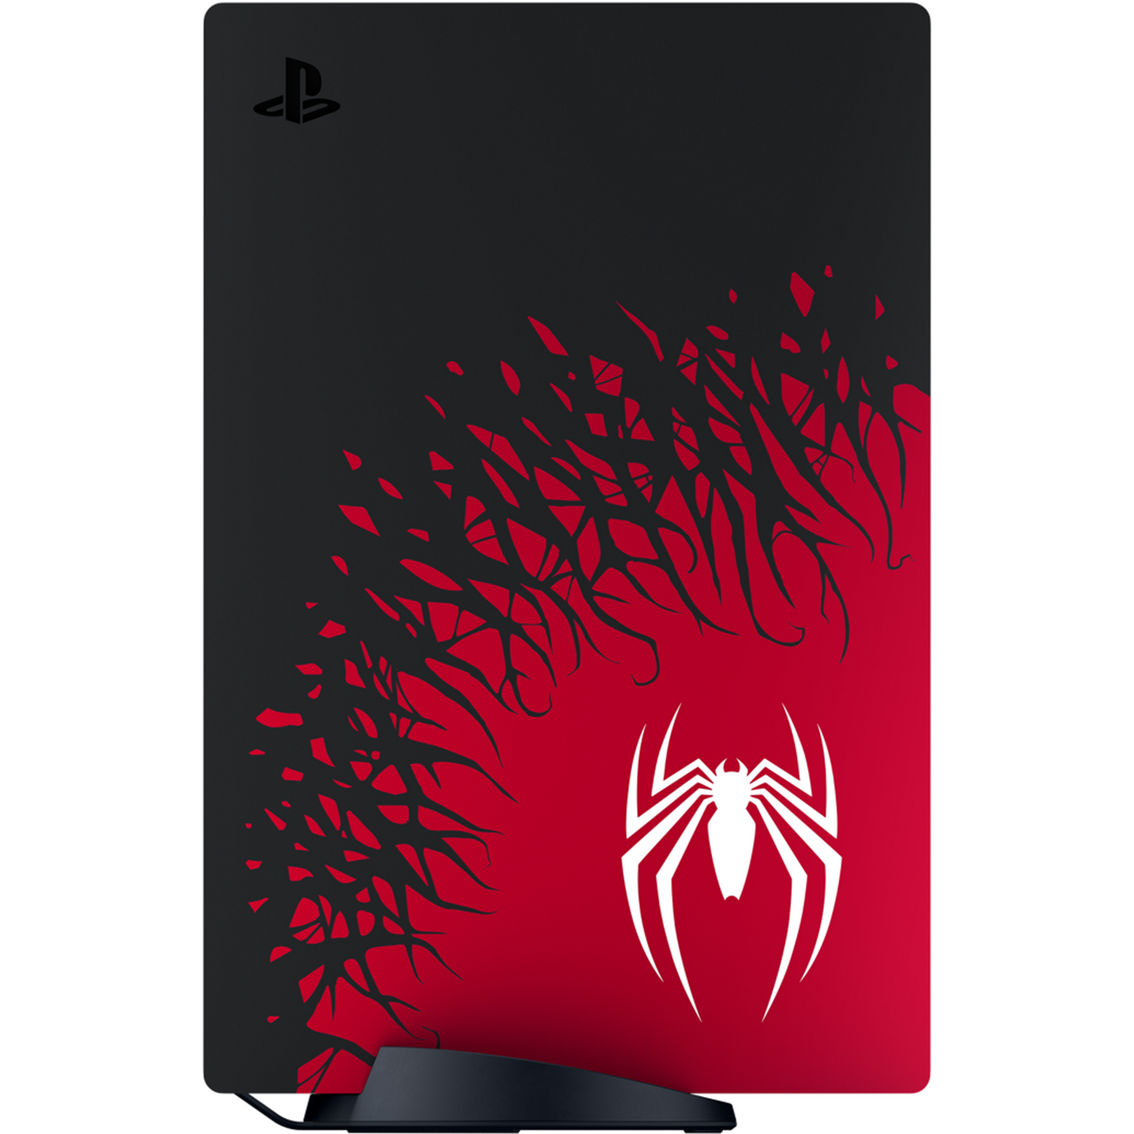 Sony PS5 Disk Console SpiderMan 2 Limited Edition Bundle - Image 2 of 2